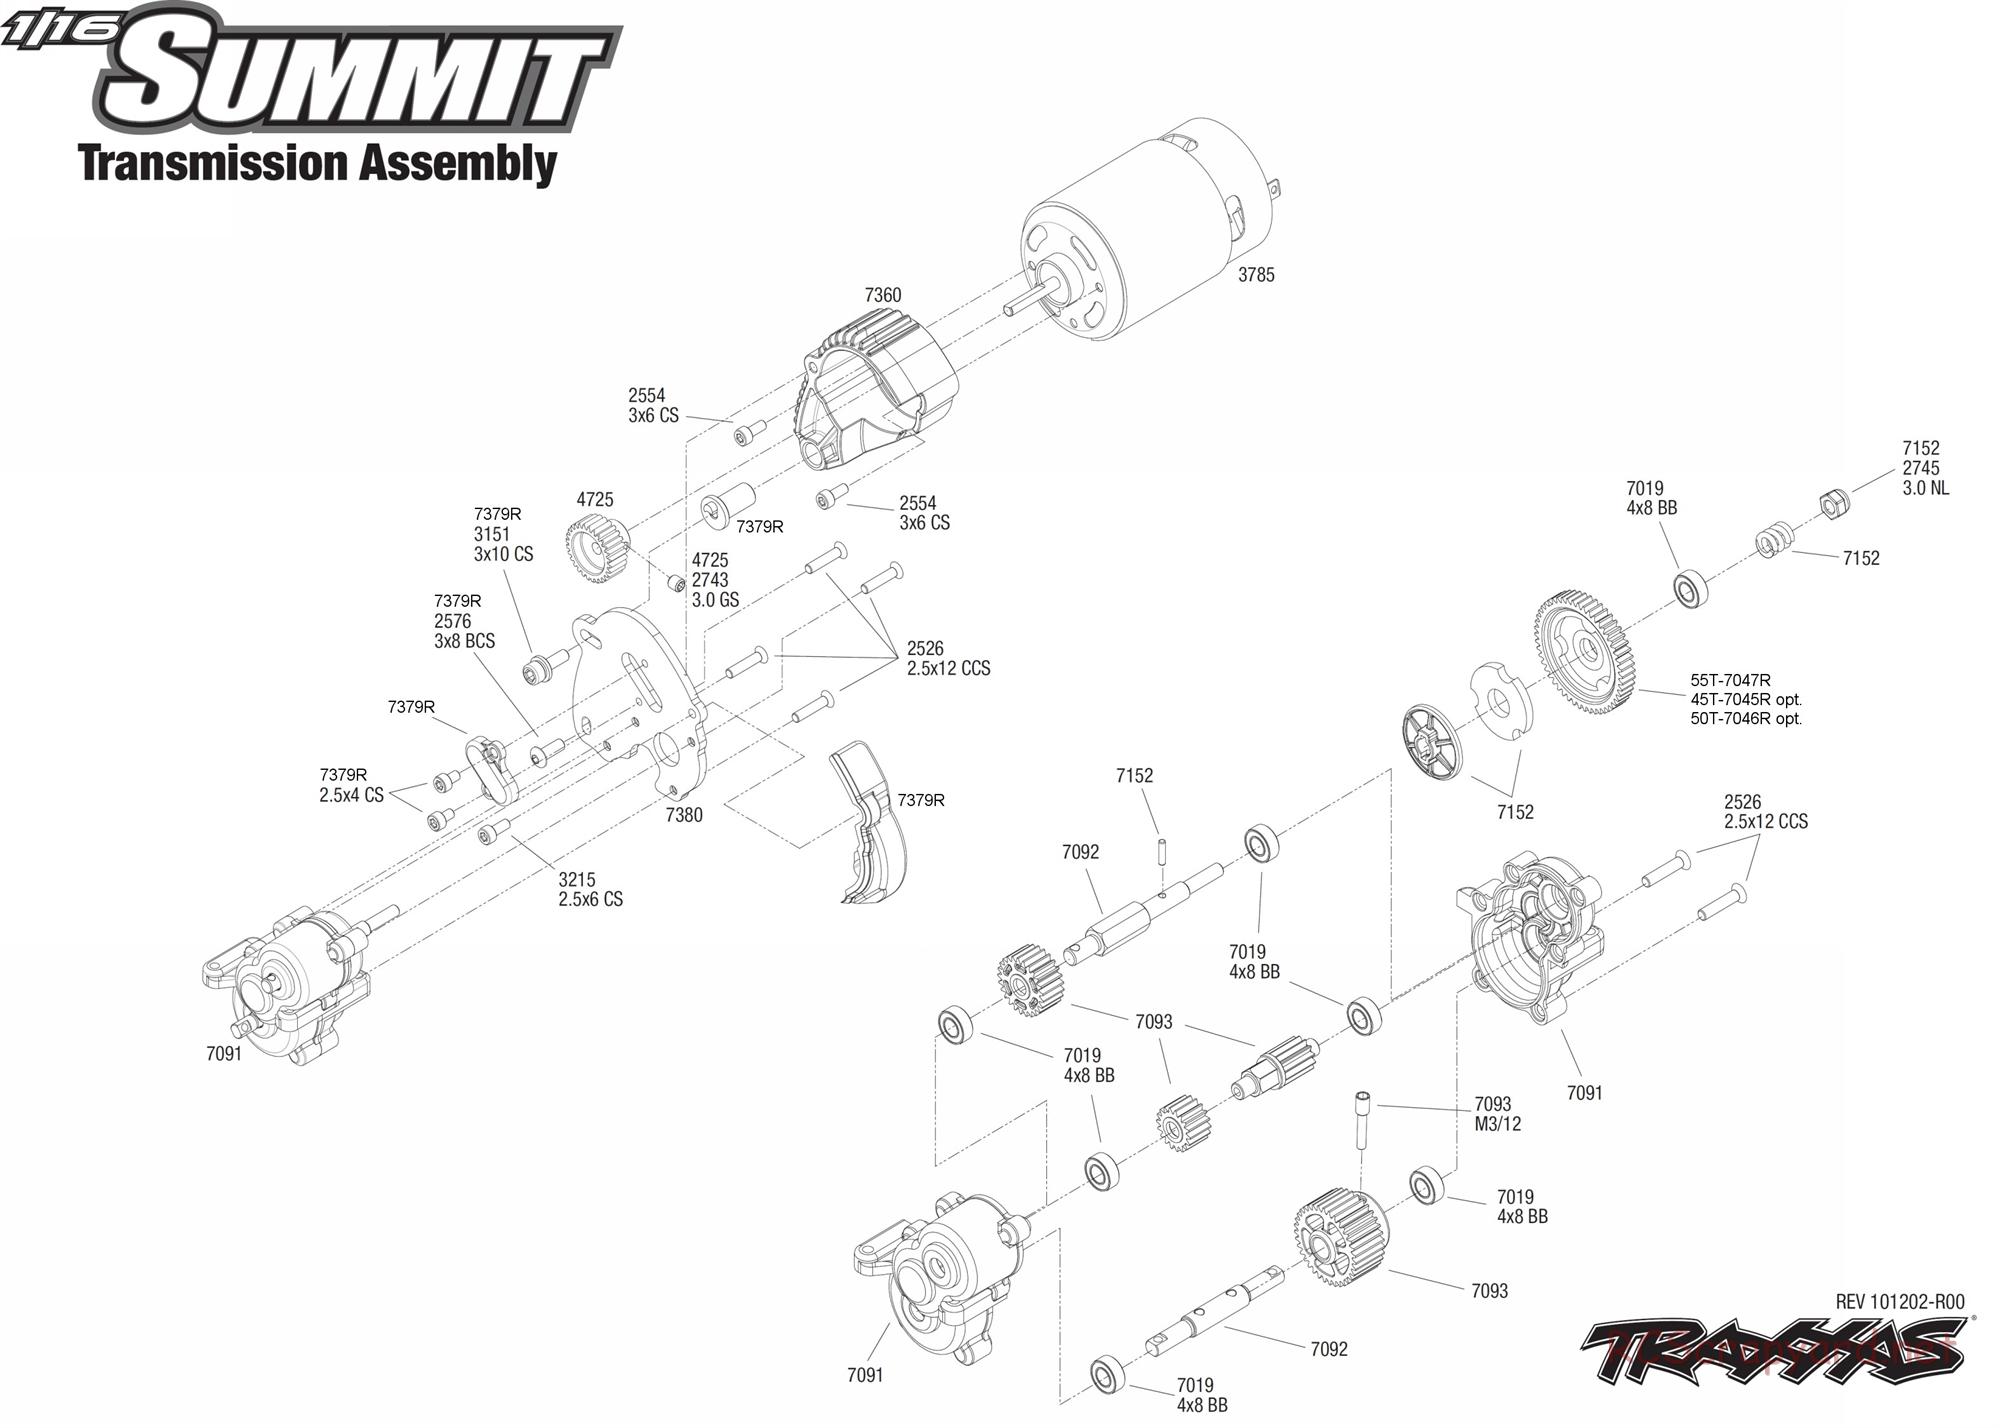 Traxxas - 1/16 Summit (2011) - Exploded Views - Page 5